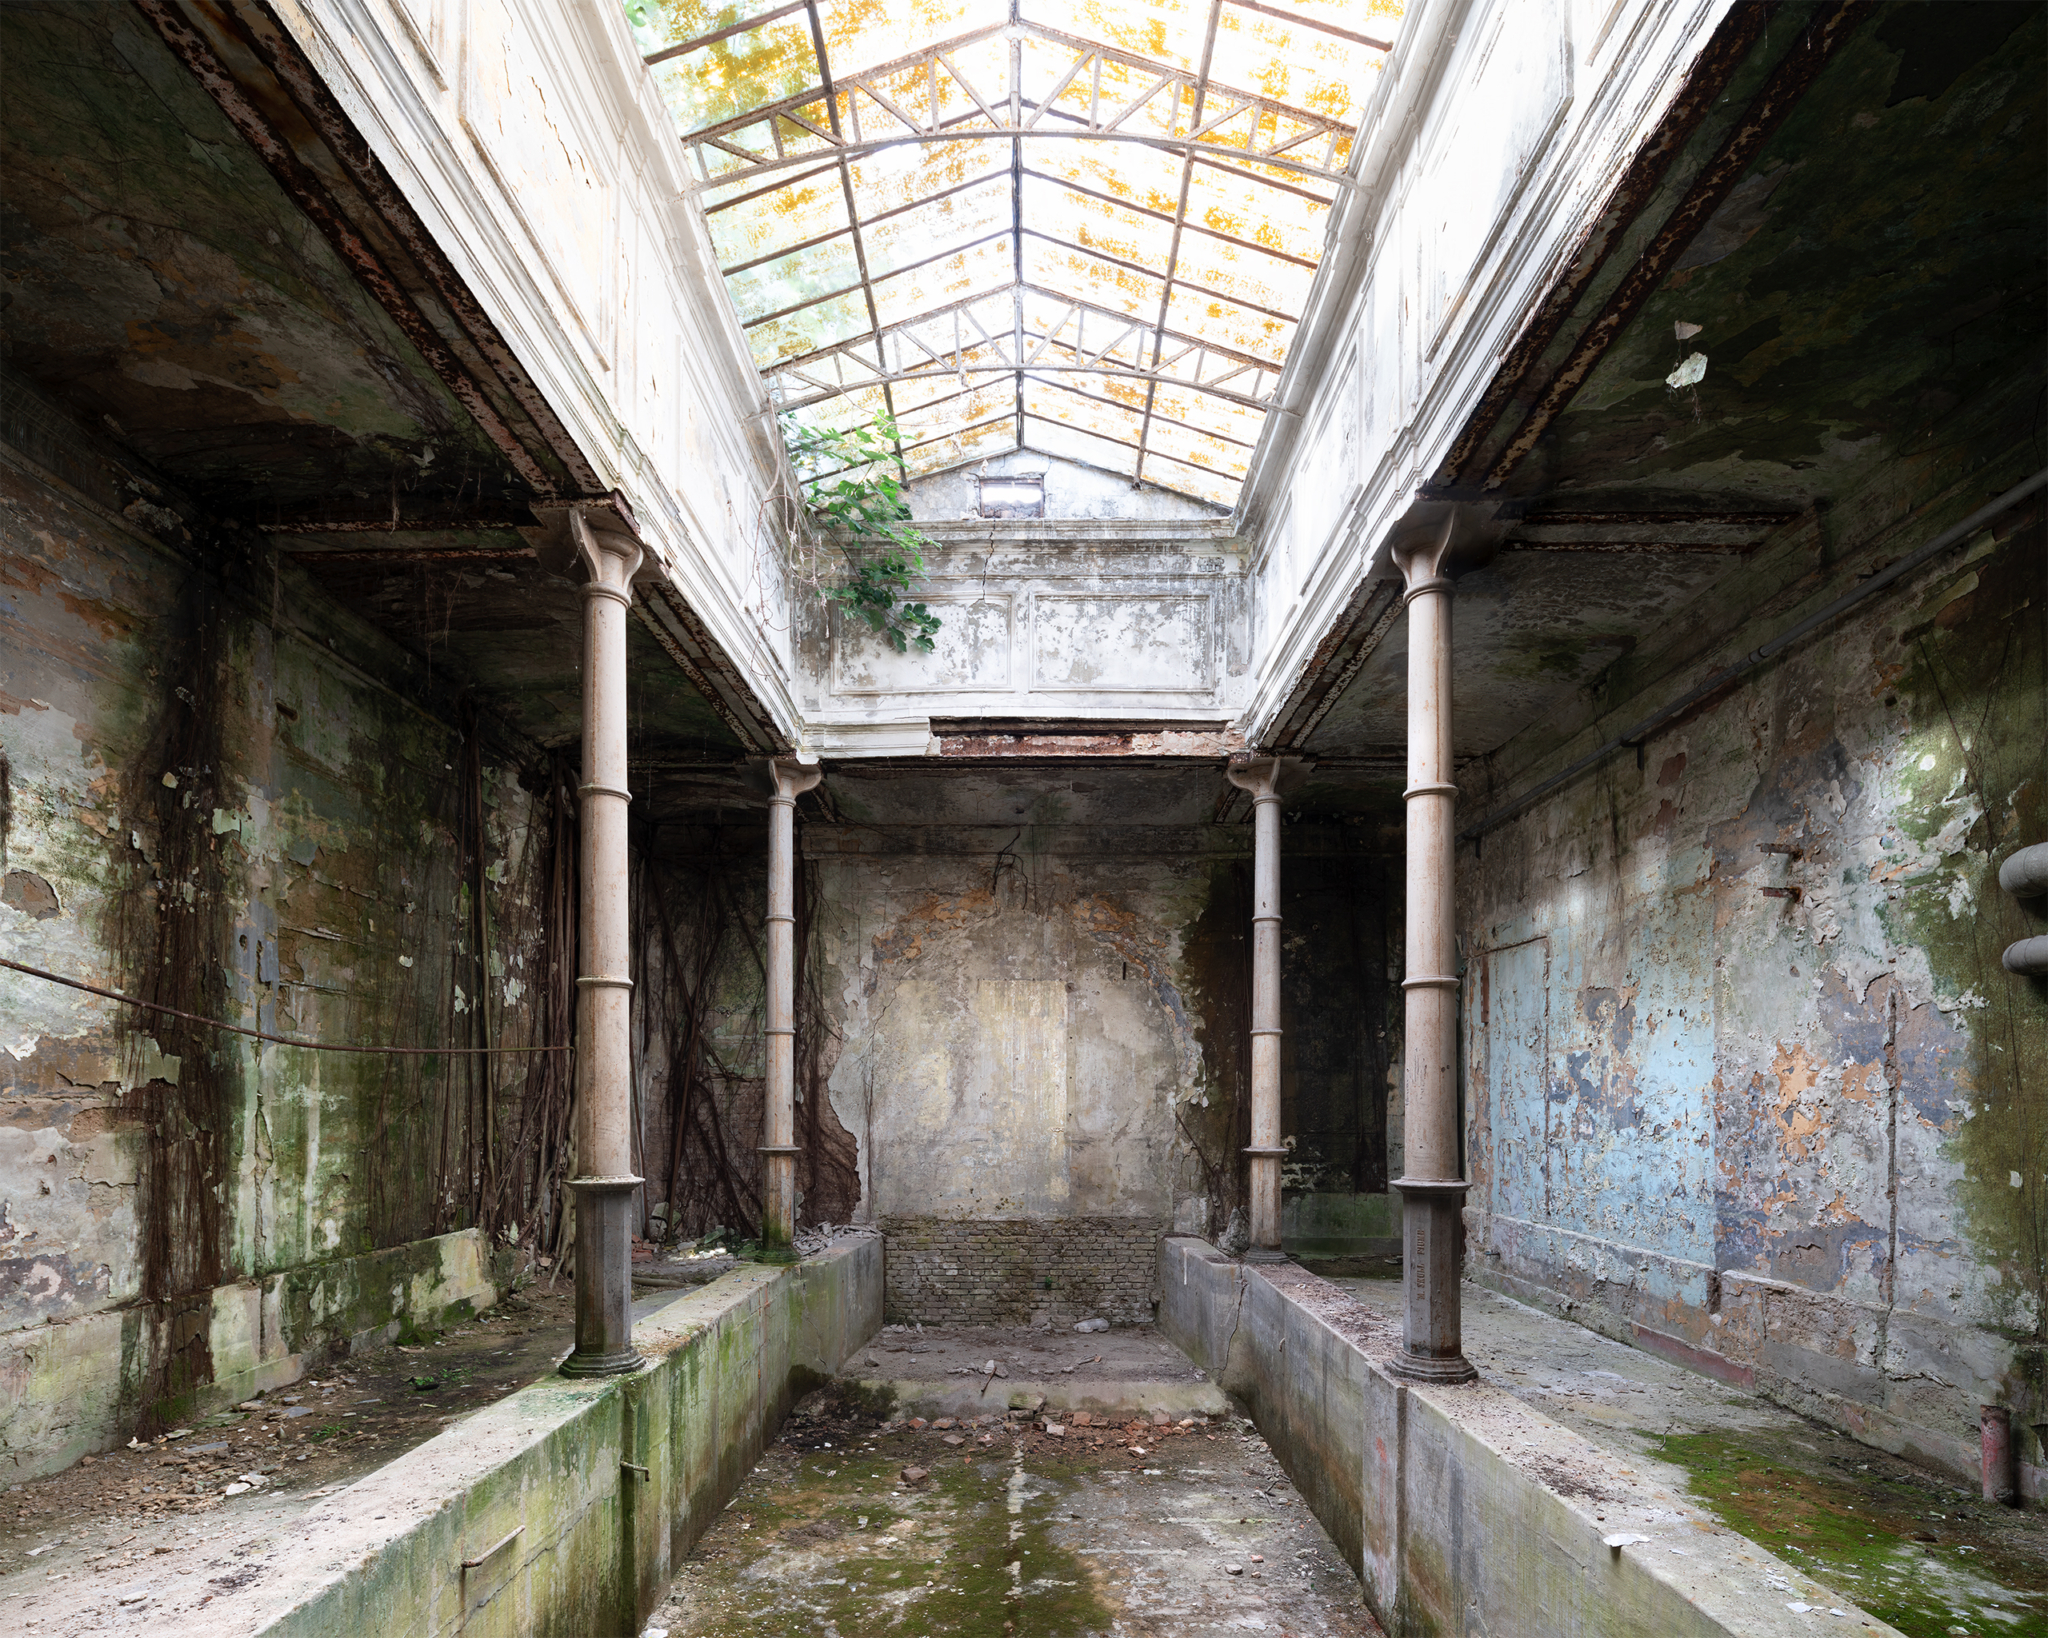 Big pool with huge decay inside derelict baths in Europe